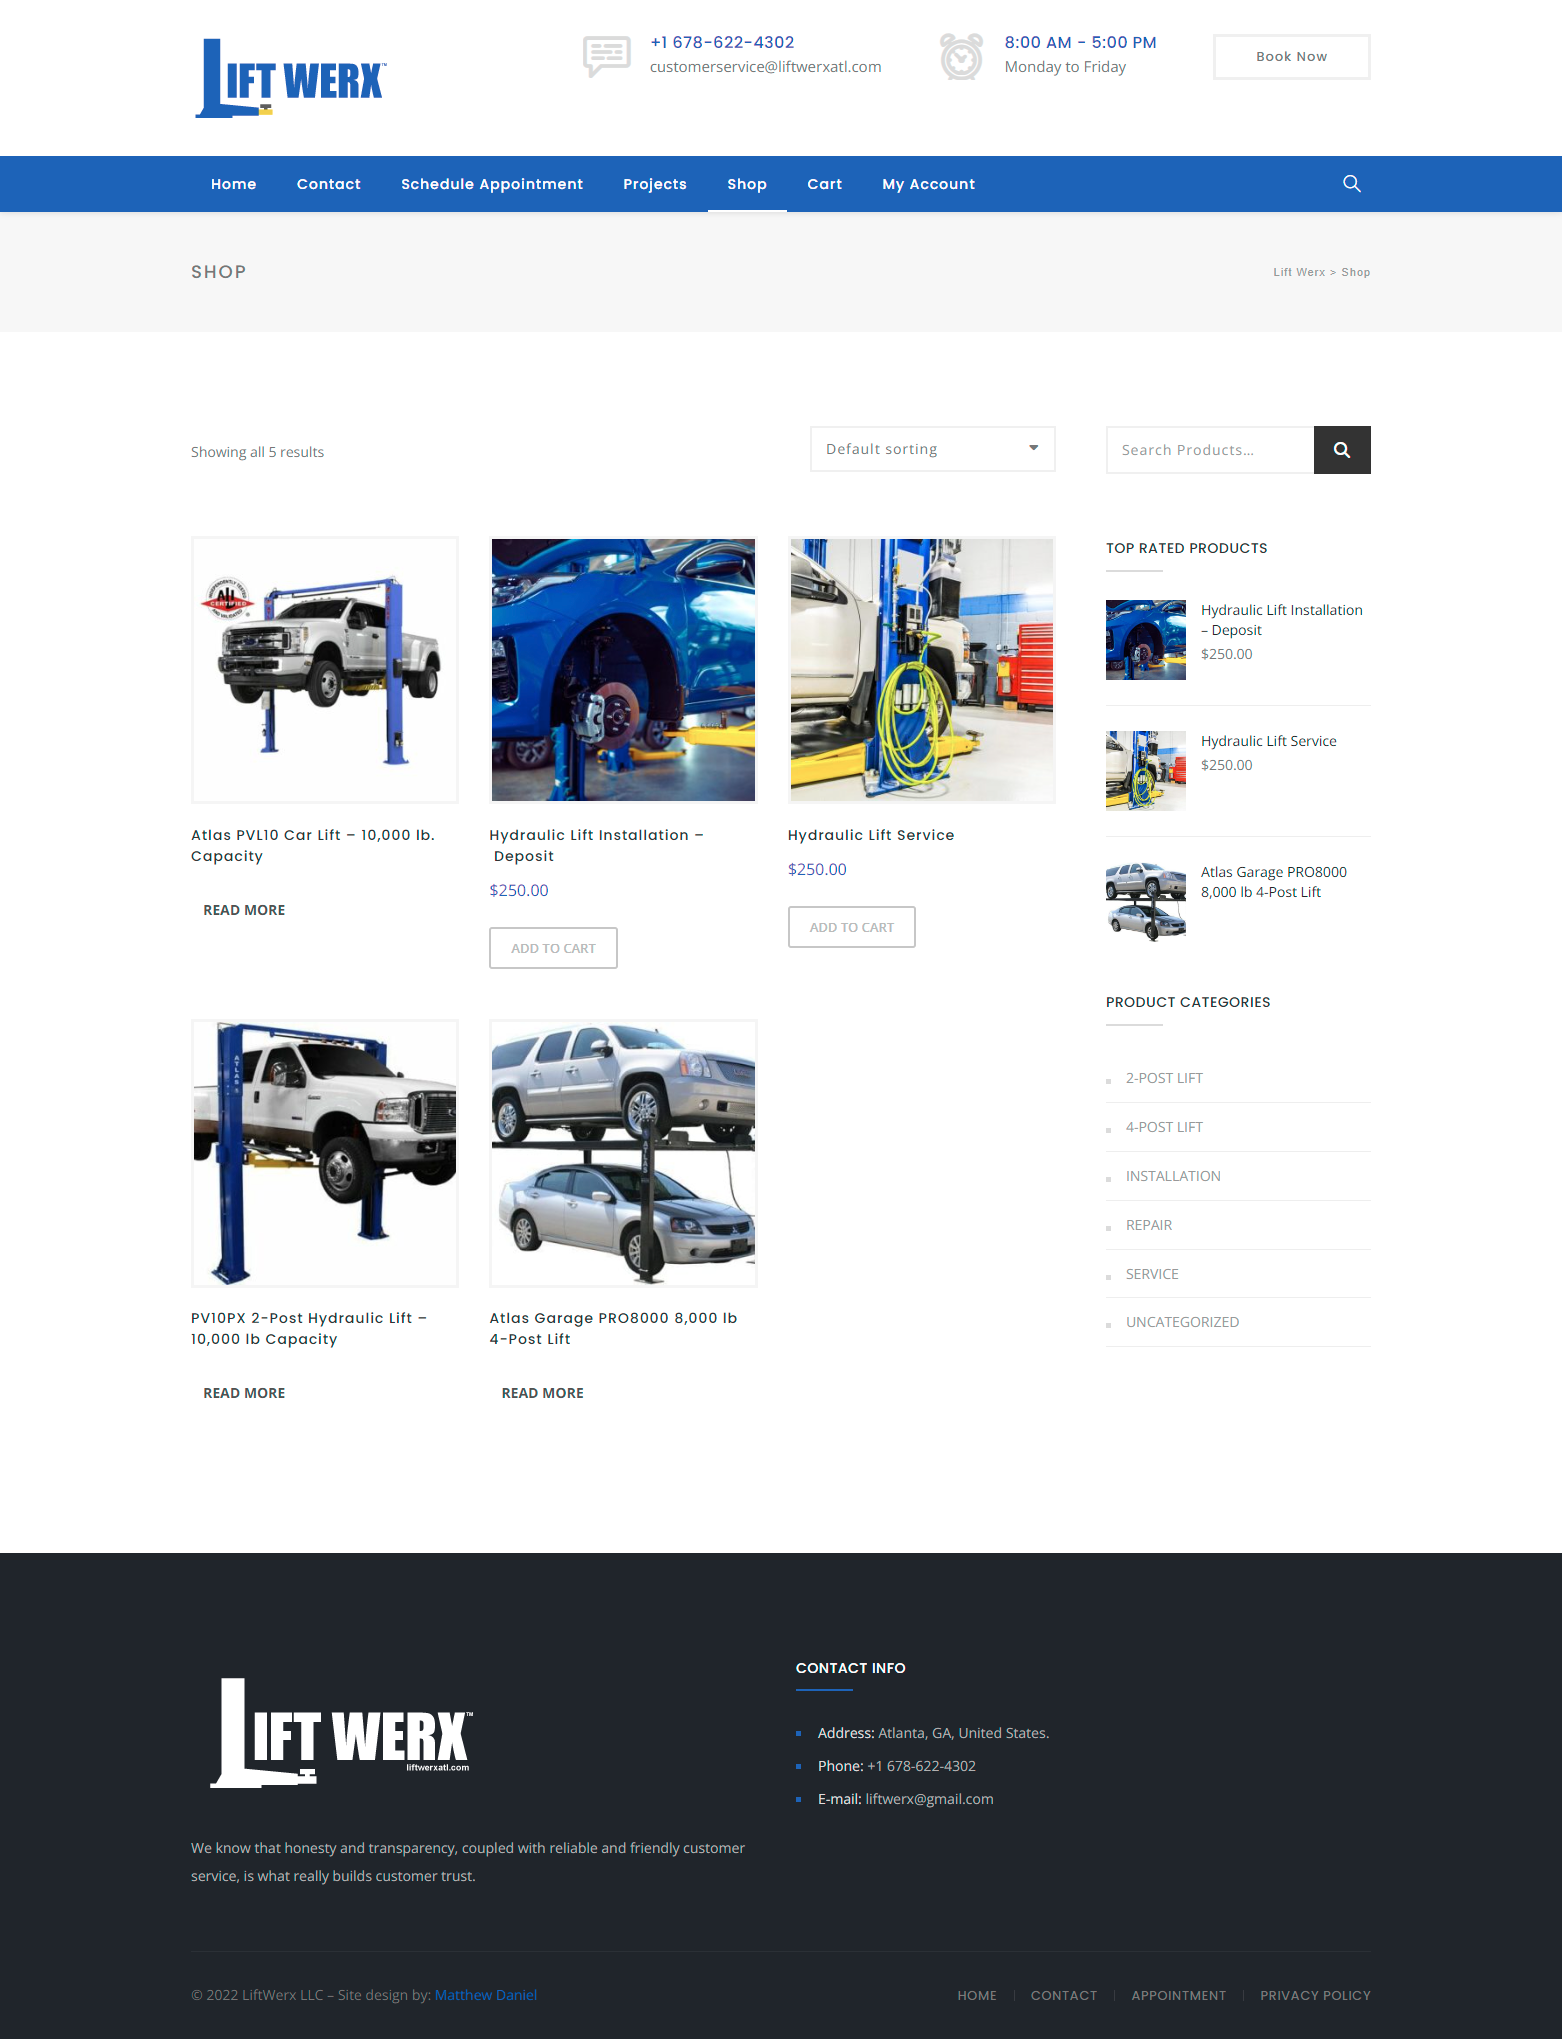 screenshot of the shop page for the Lift Werx website on the desktop experience